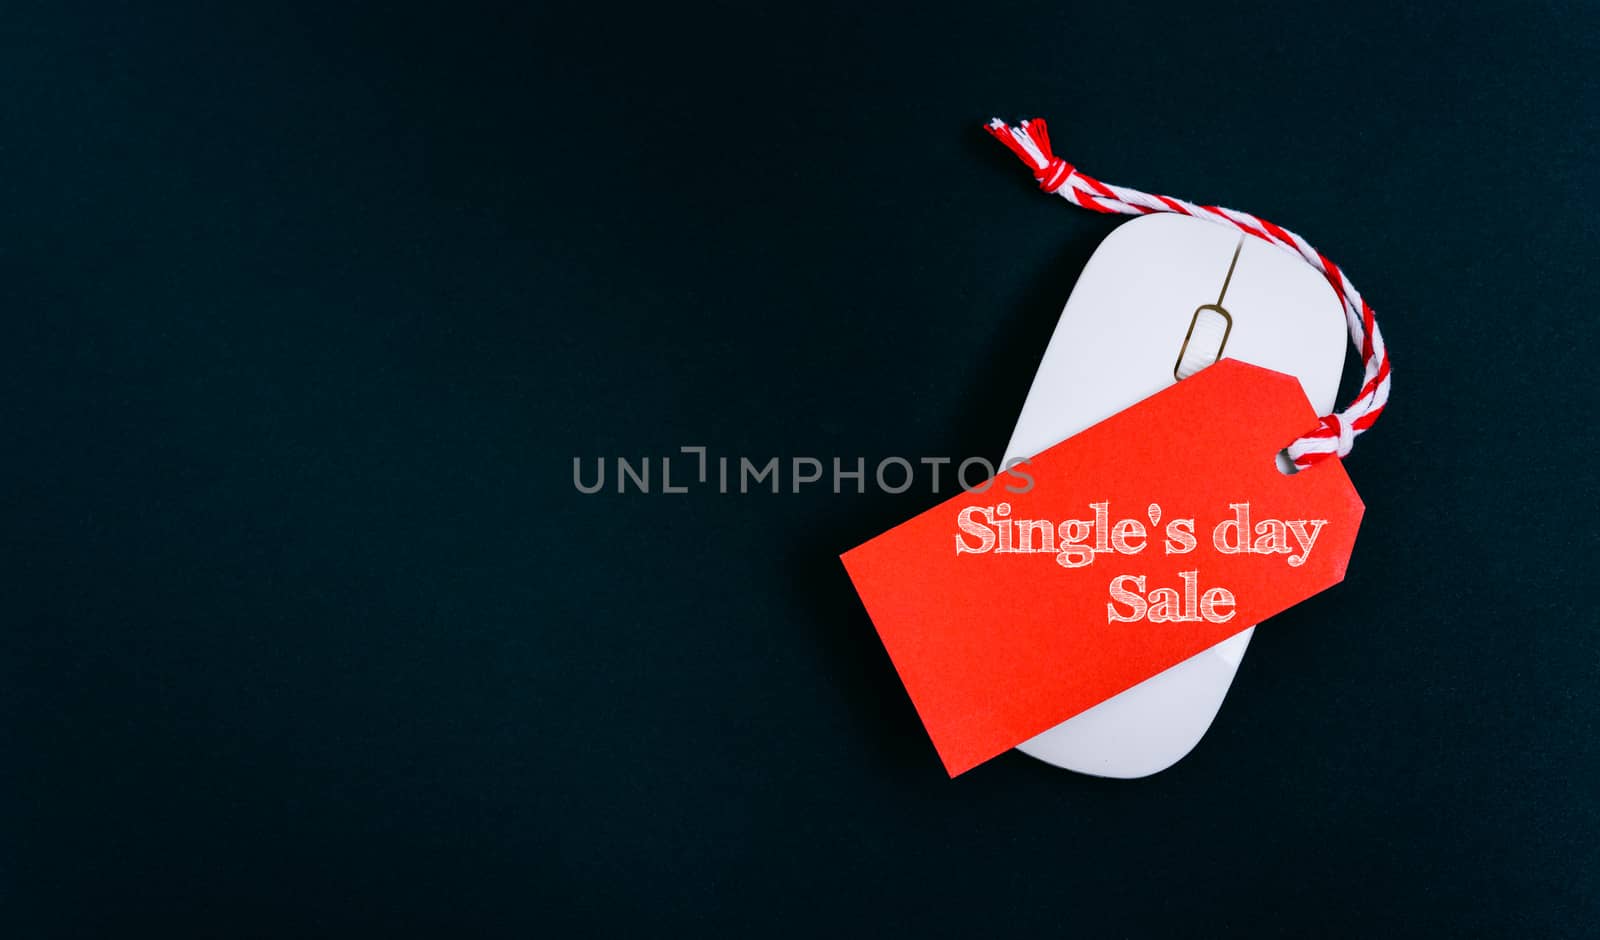 Online shopping Single's day sale text red tag on computer mouse with black background